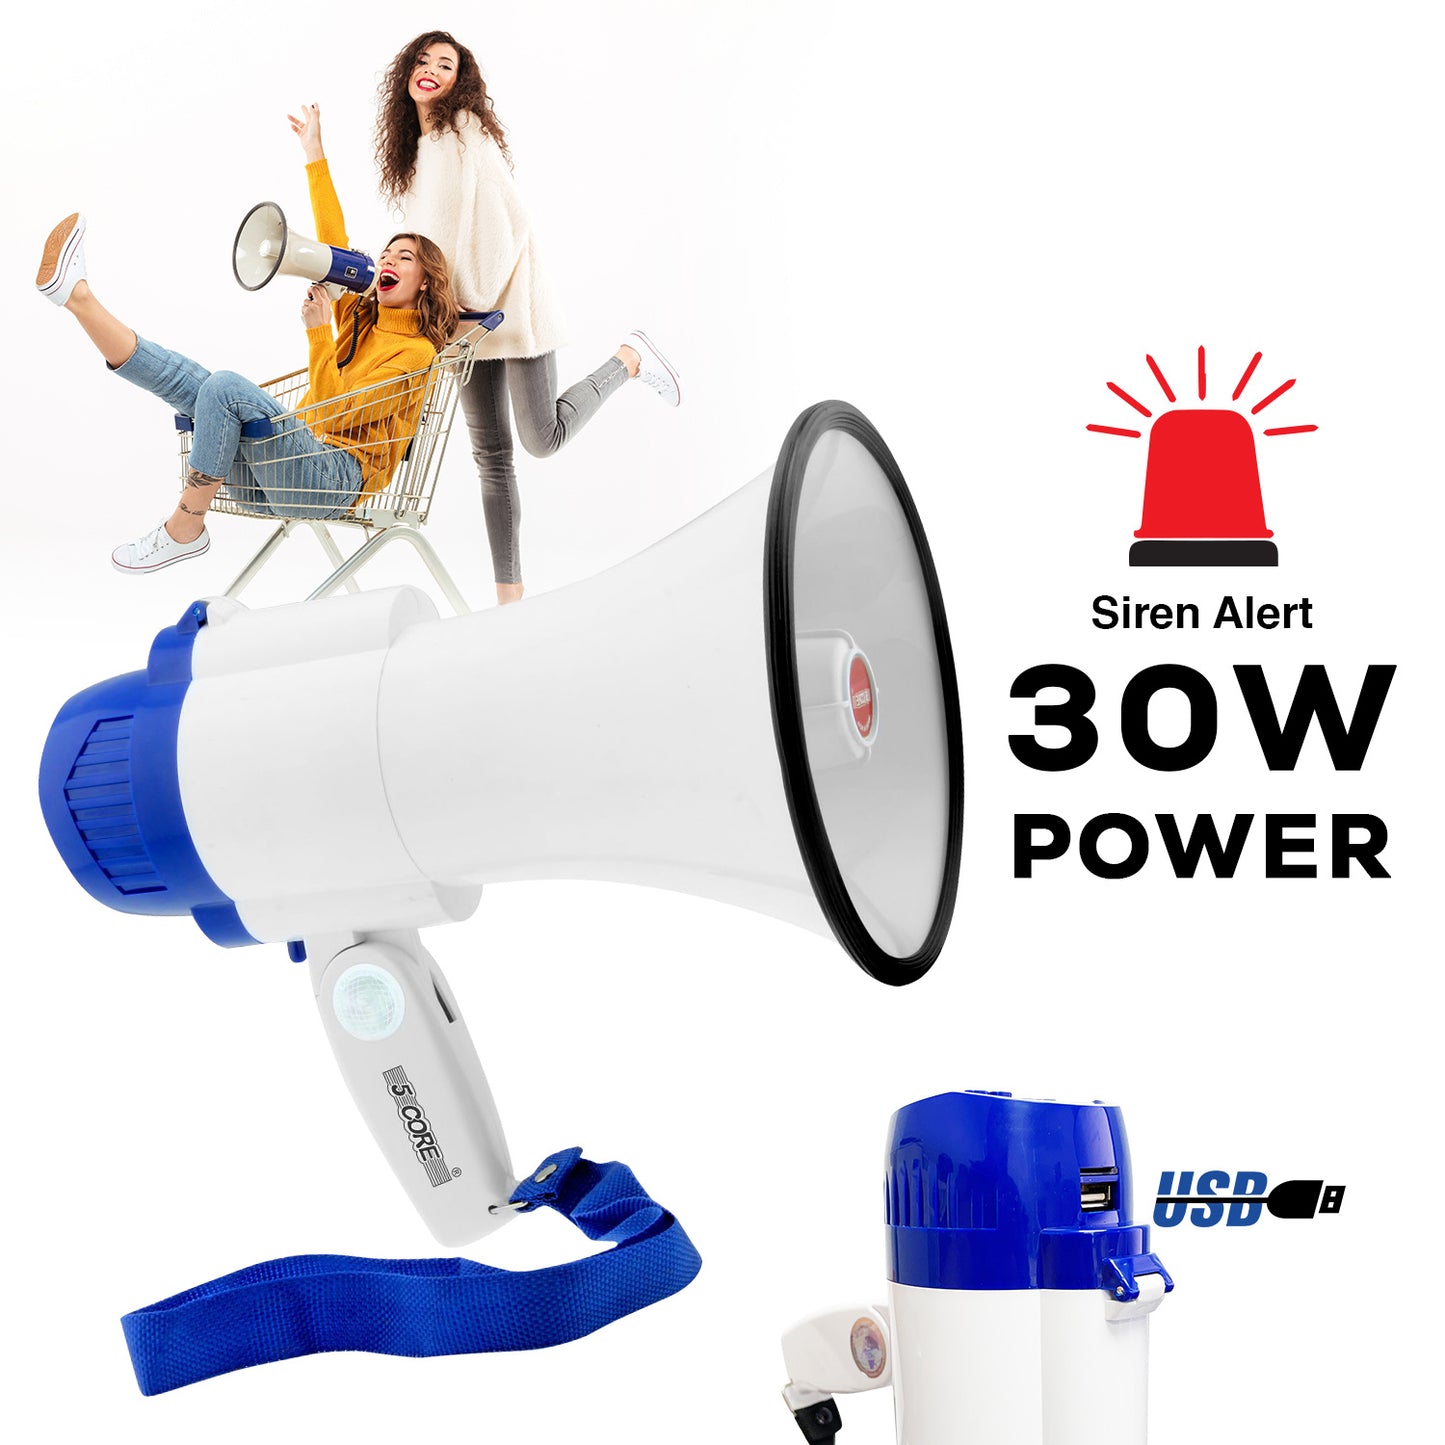 5 Core Megaphone Bull Horn 30W Loud Speaker 800 Yards Range Portable Bullhorn w Recording Volume Control Siren Noise Maker for Kids and Adults for Coaches Cheerleading Football Safety Drills 8R